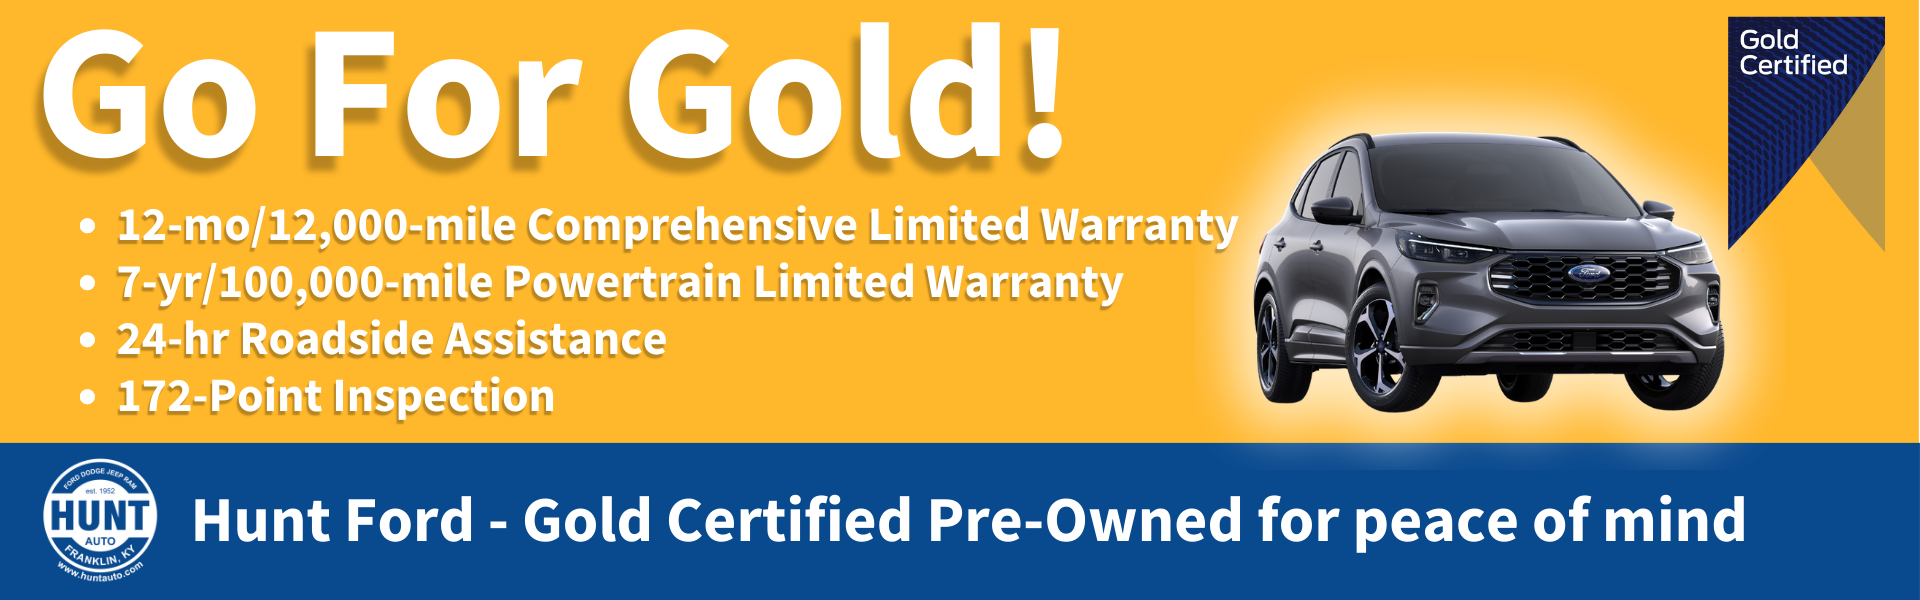 Hunt Ford Gold Certified Pre-Owned are Better Used Cars